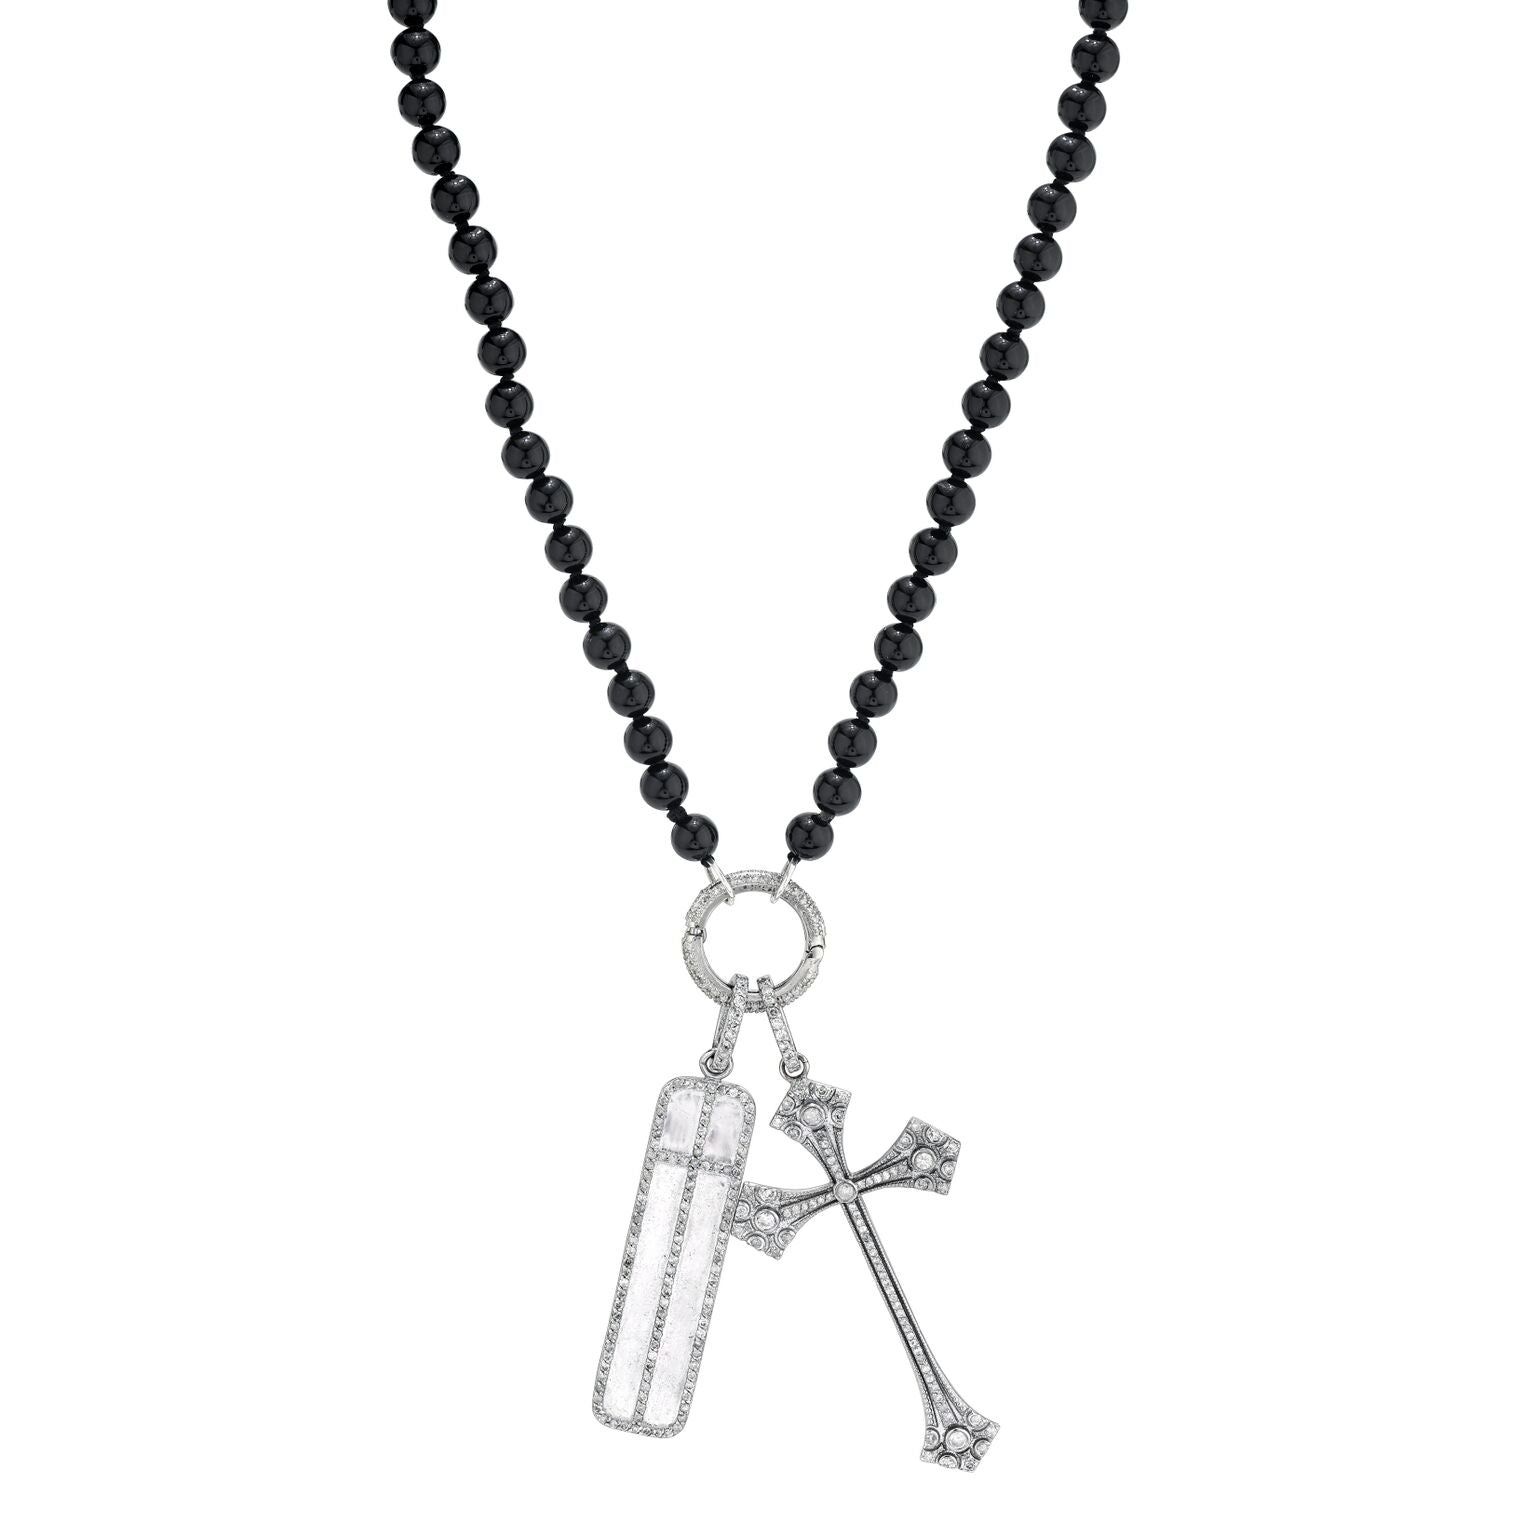 Double Cross Onyx Knotted Necklace  N0001353 - TBird